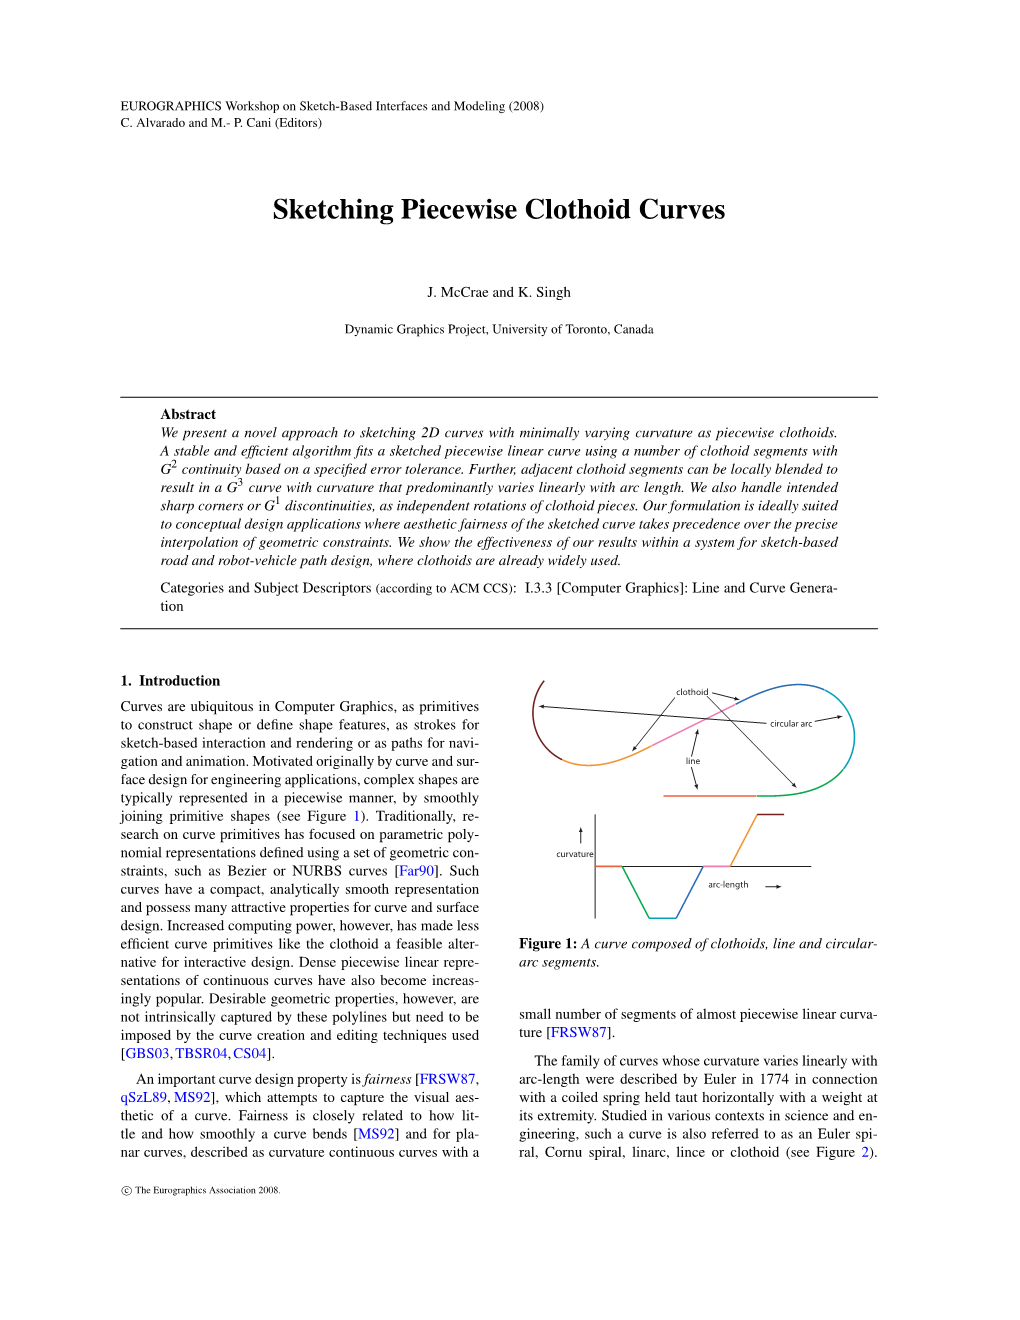 Sketching Piecewise Clothoid Curves